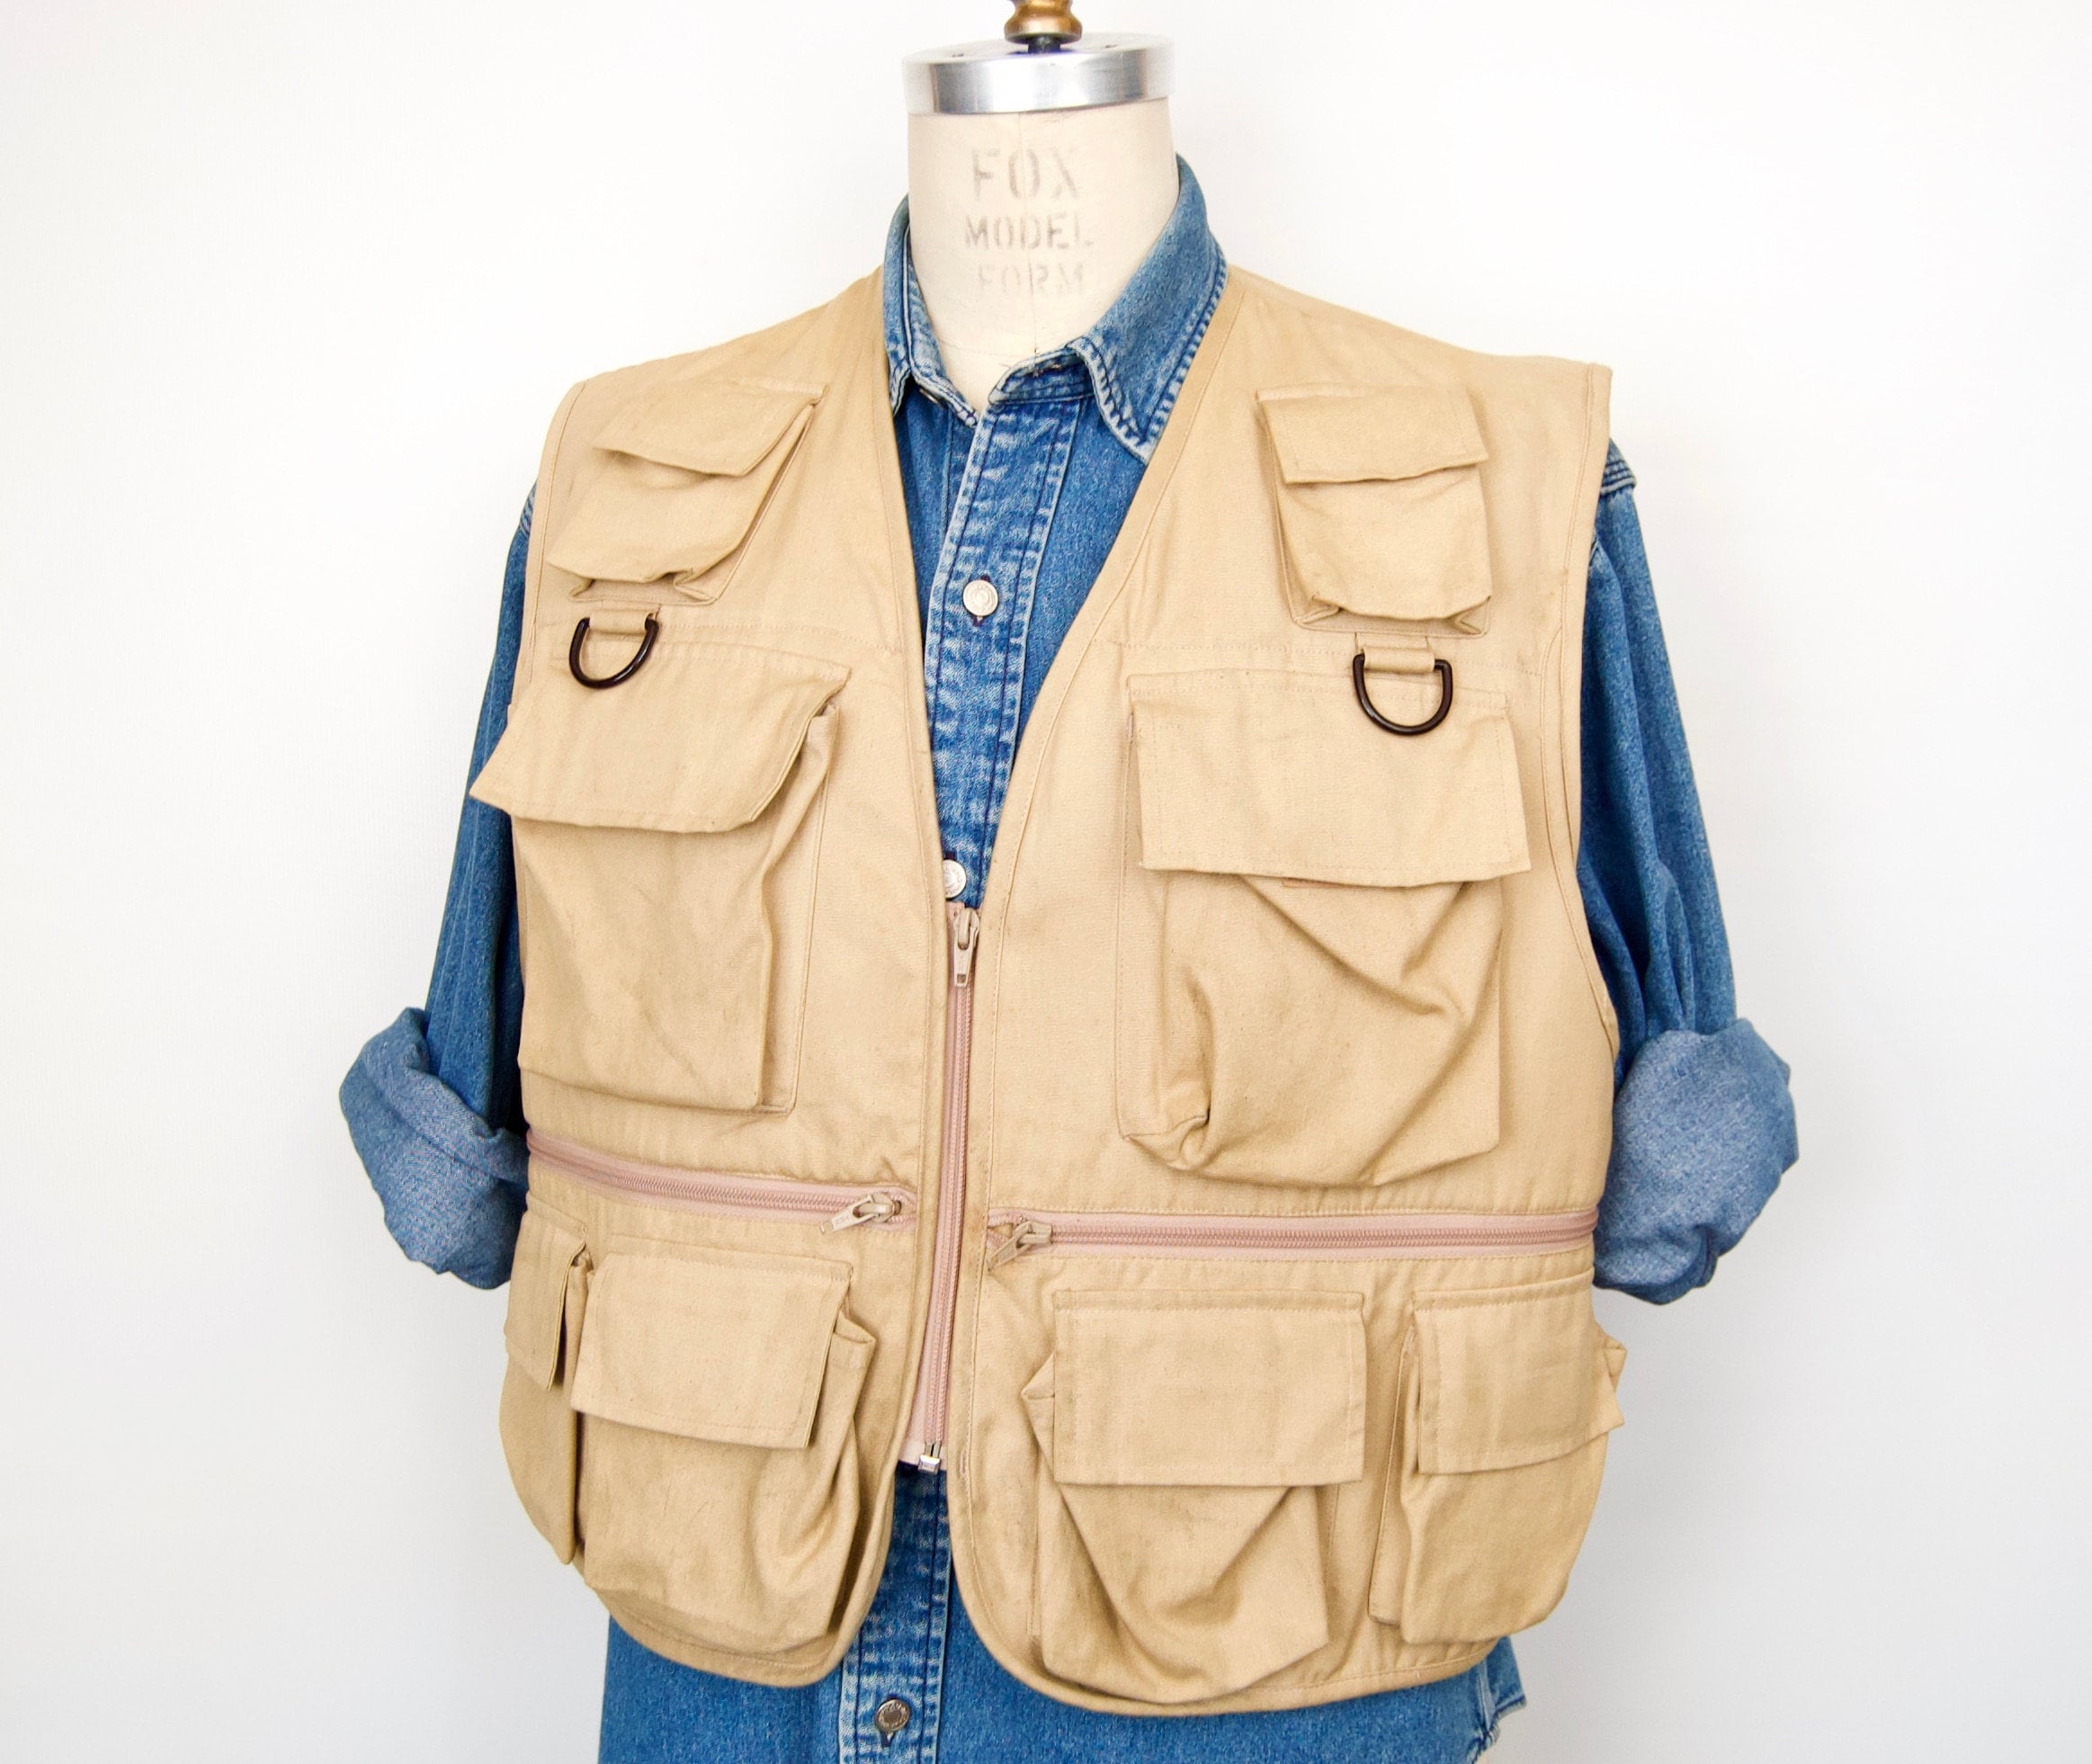 1980s Field & Stream Hunting/Fishing Vest in tan khaki cotton canvas /  men's extra large